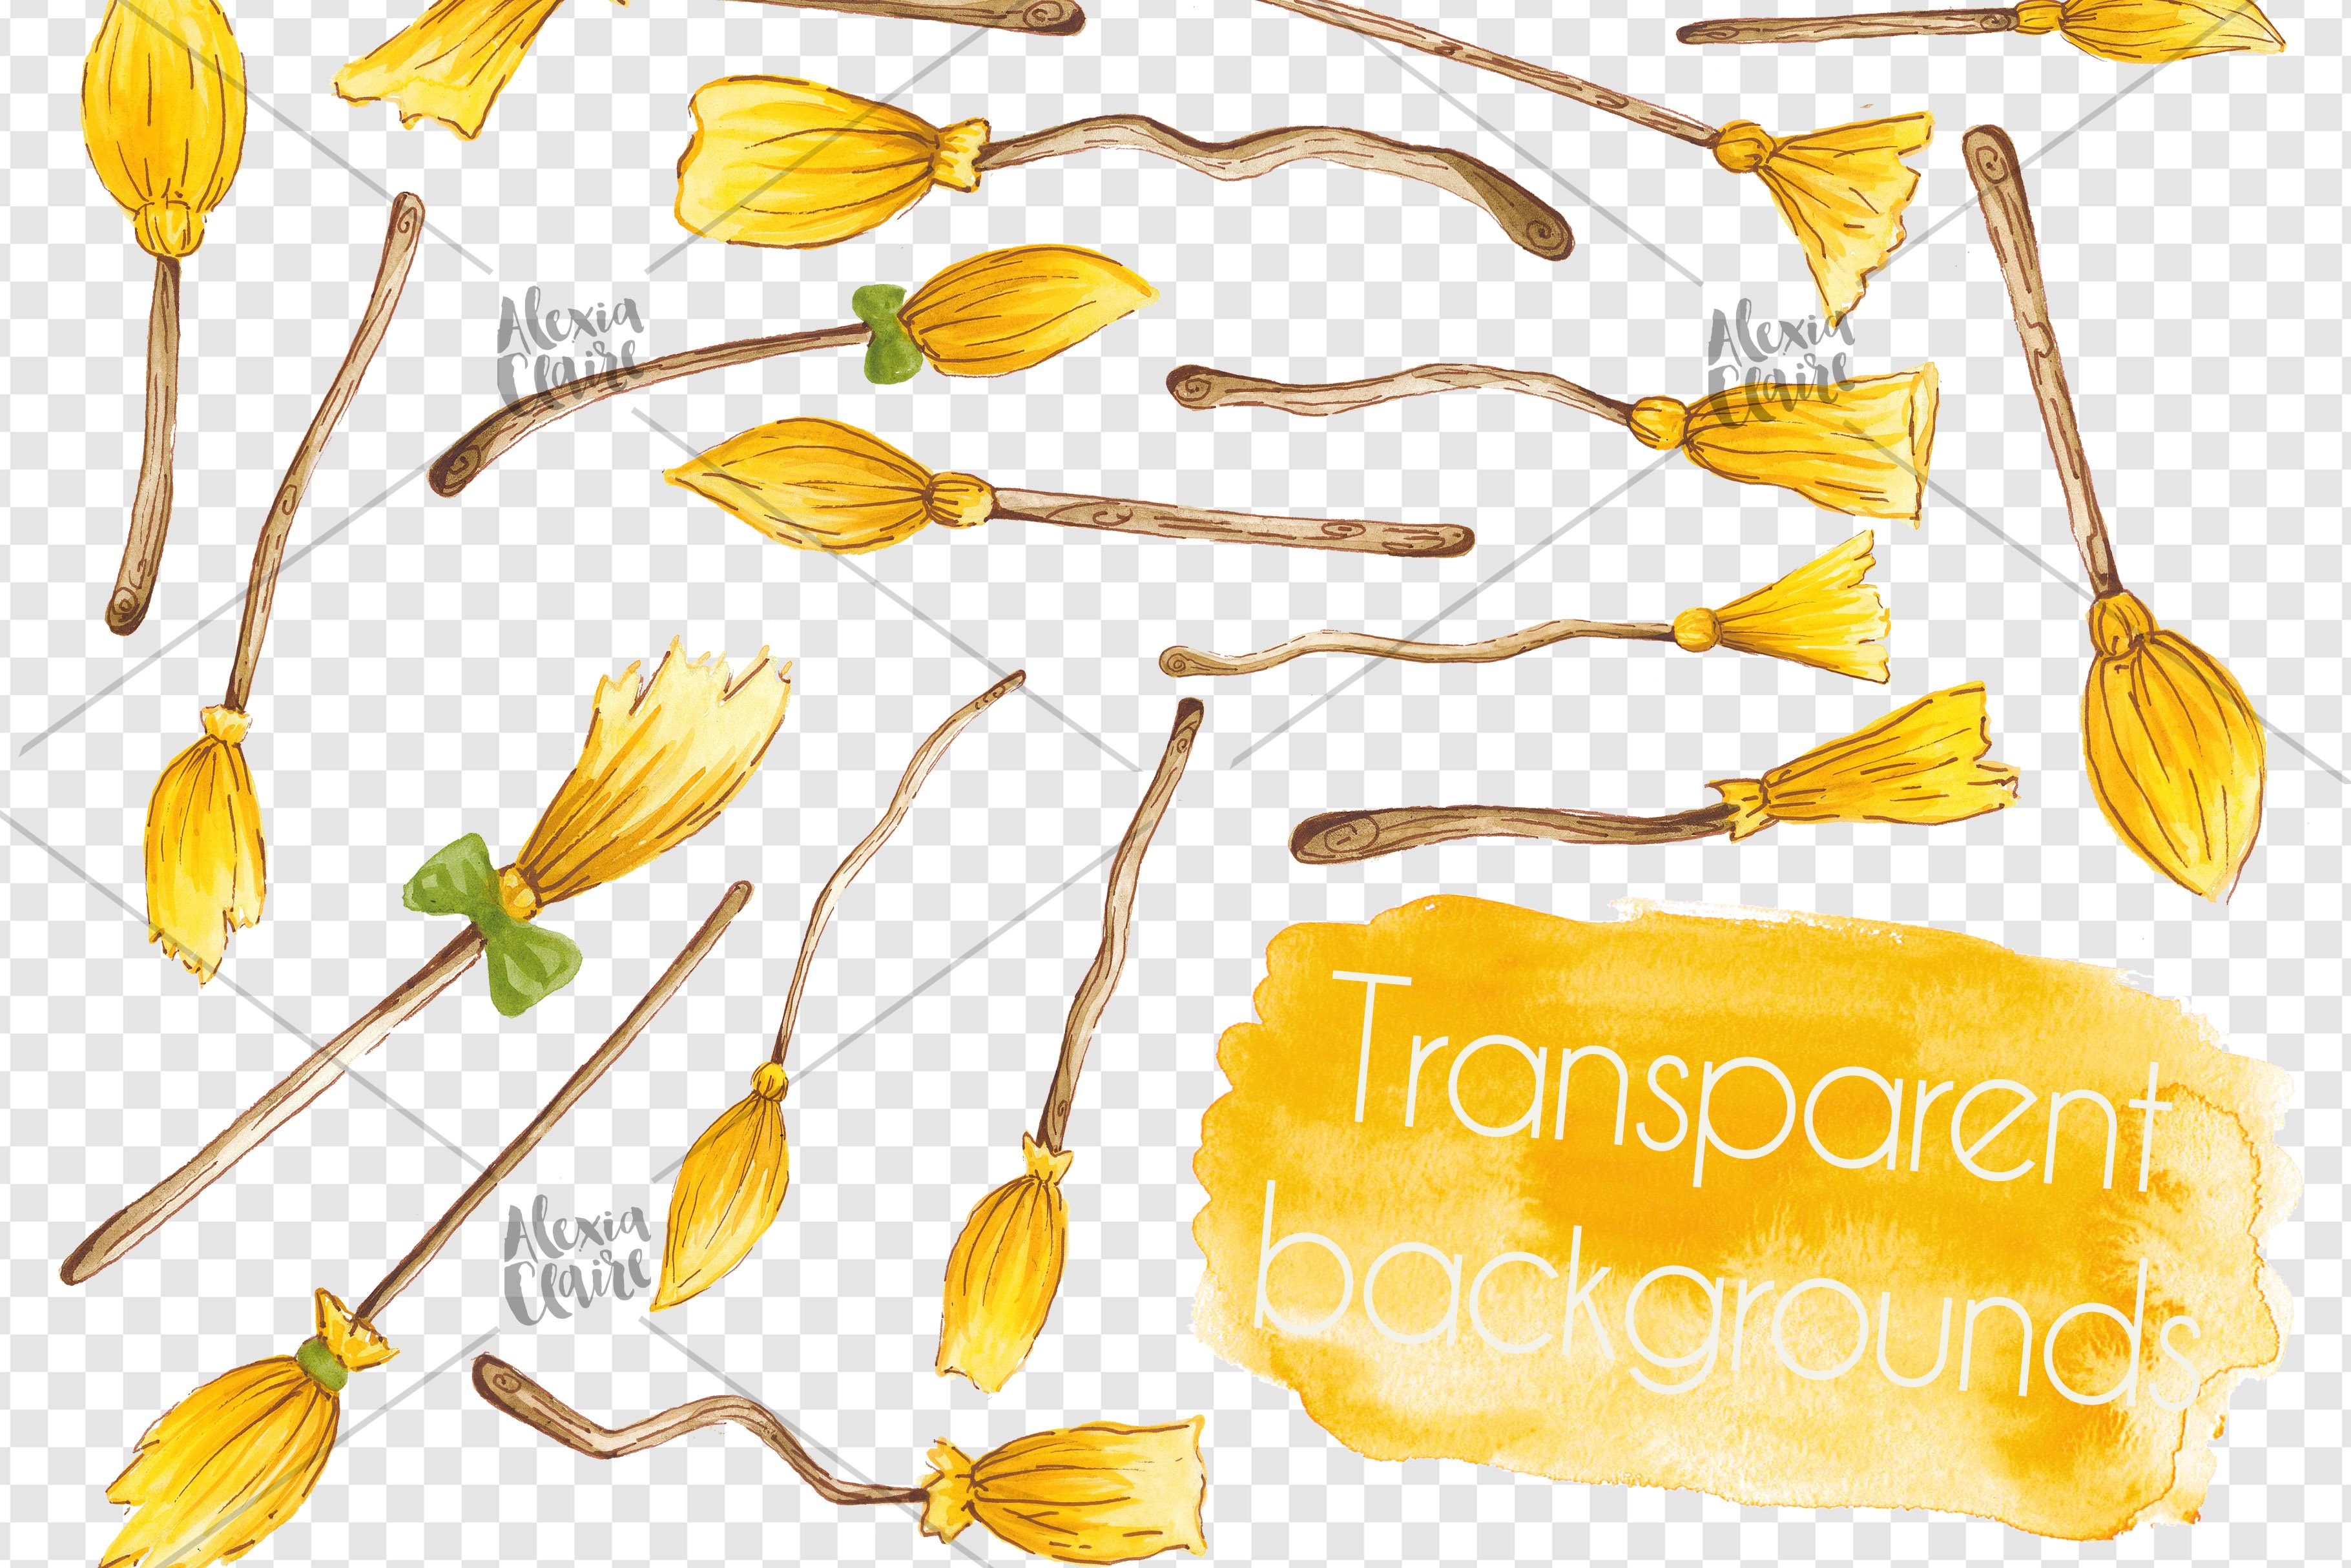 3 broomstick clipart 659